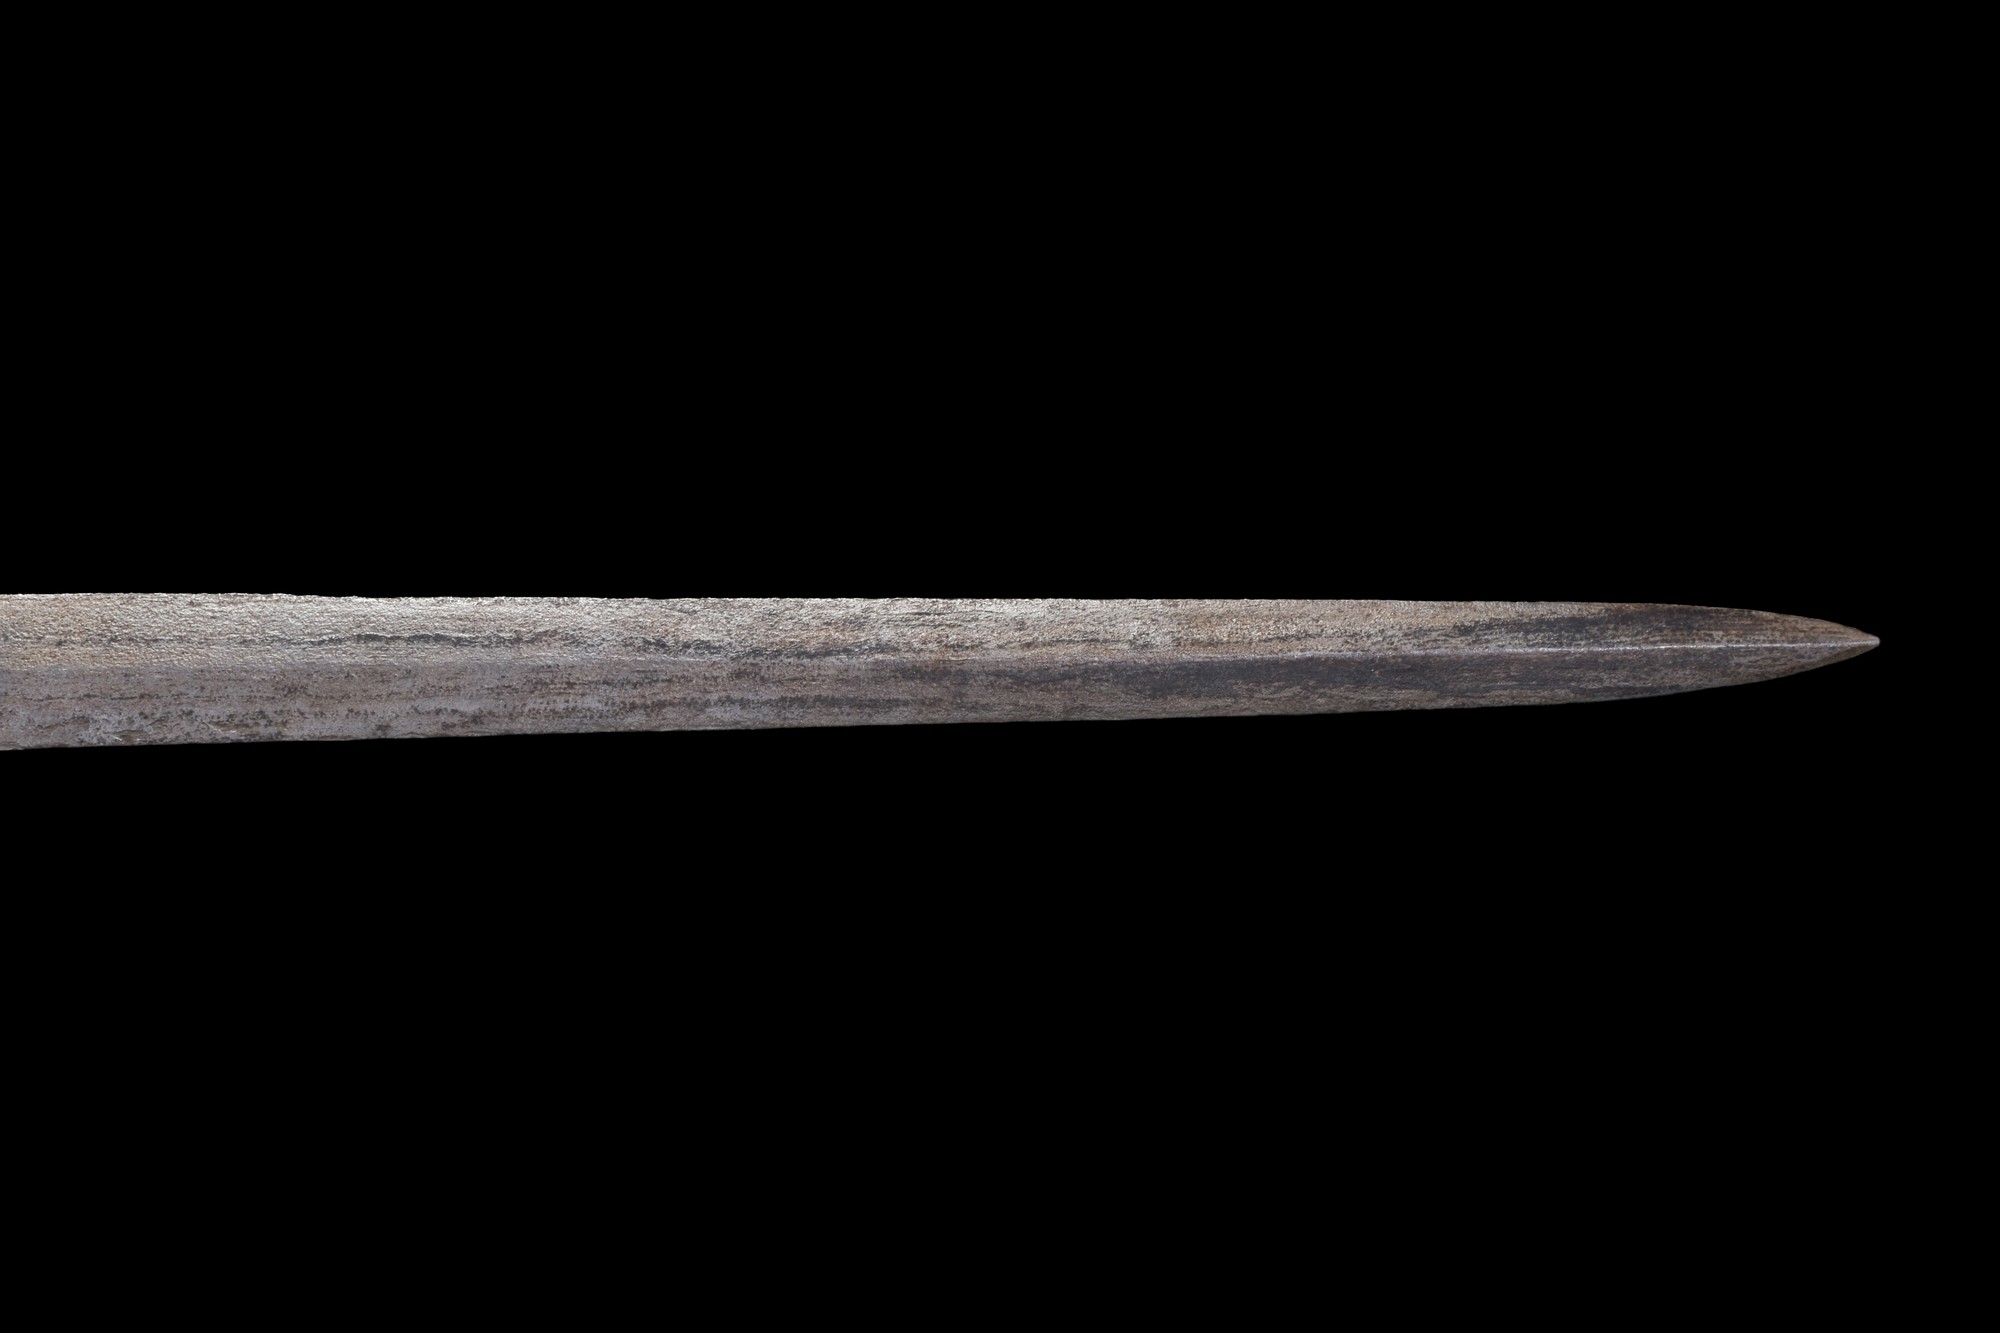 RARE 15th C. EPEE IRON SWORD WITH REPORT - Image 4 of 5